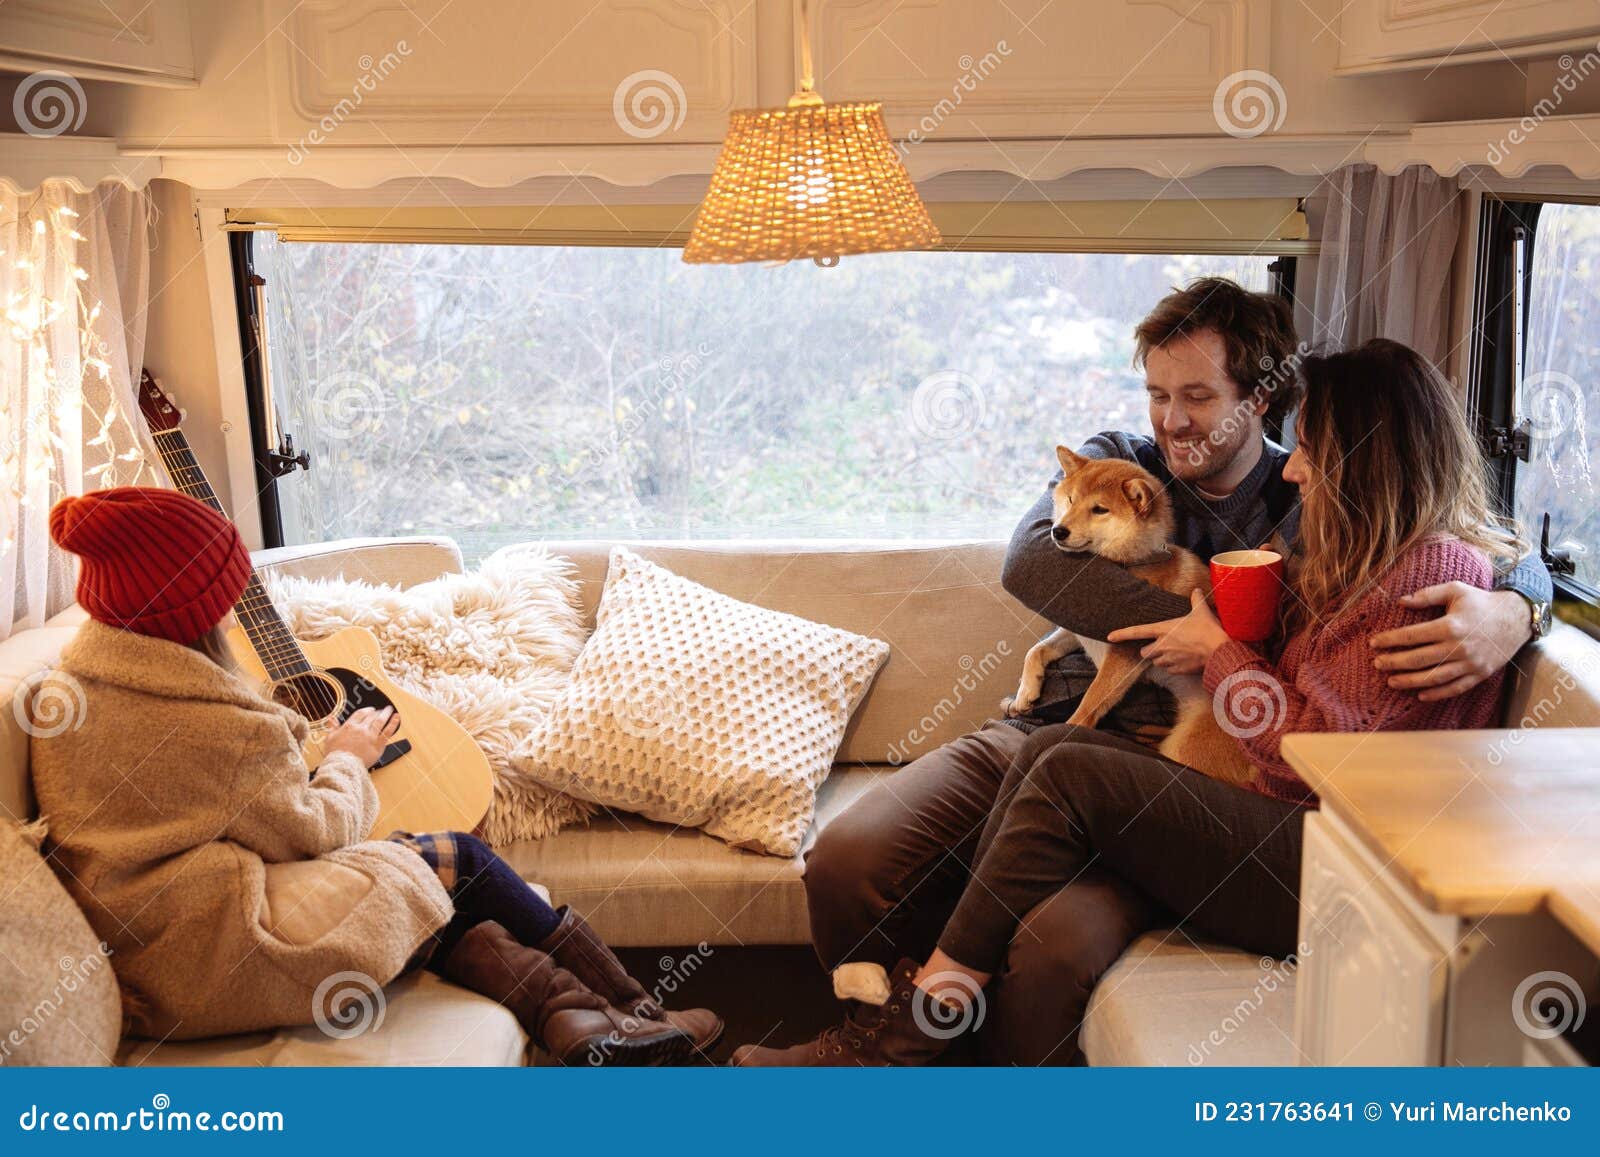 winter vacation in rv of parents and kid. happy mom and dad inside camper car travel with child